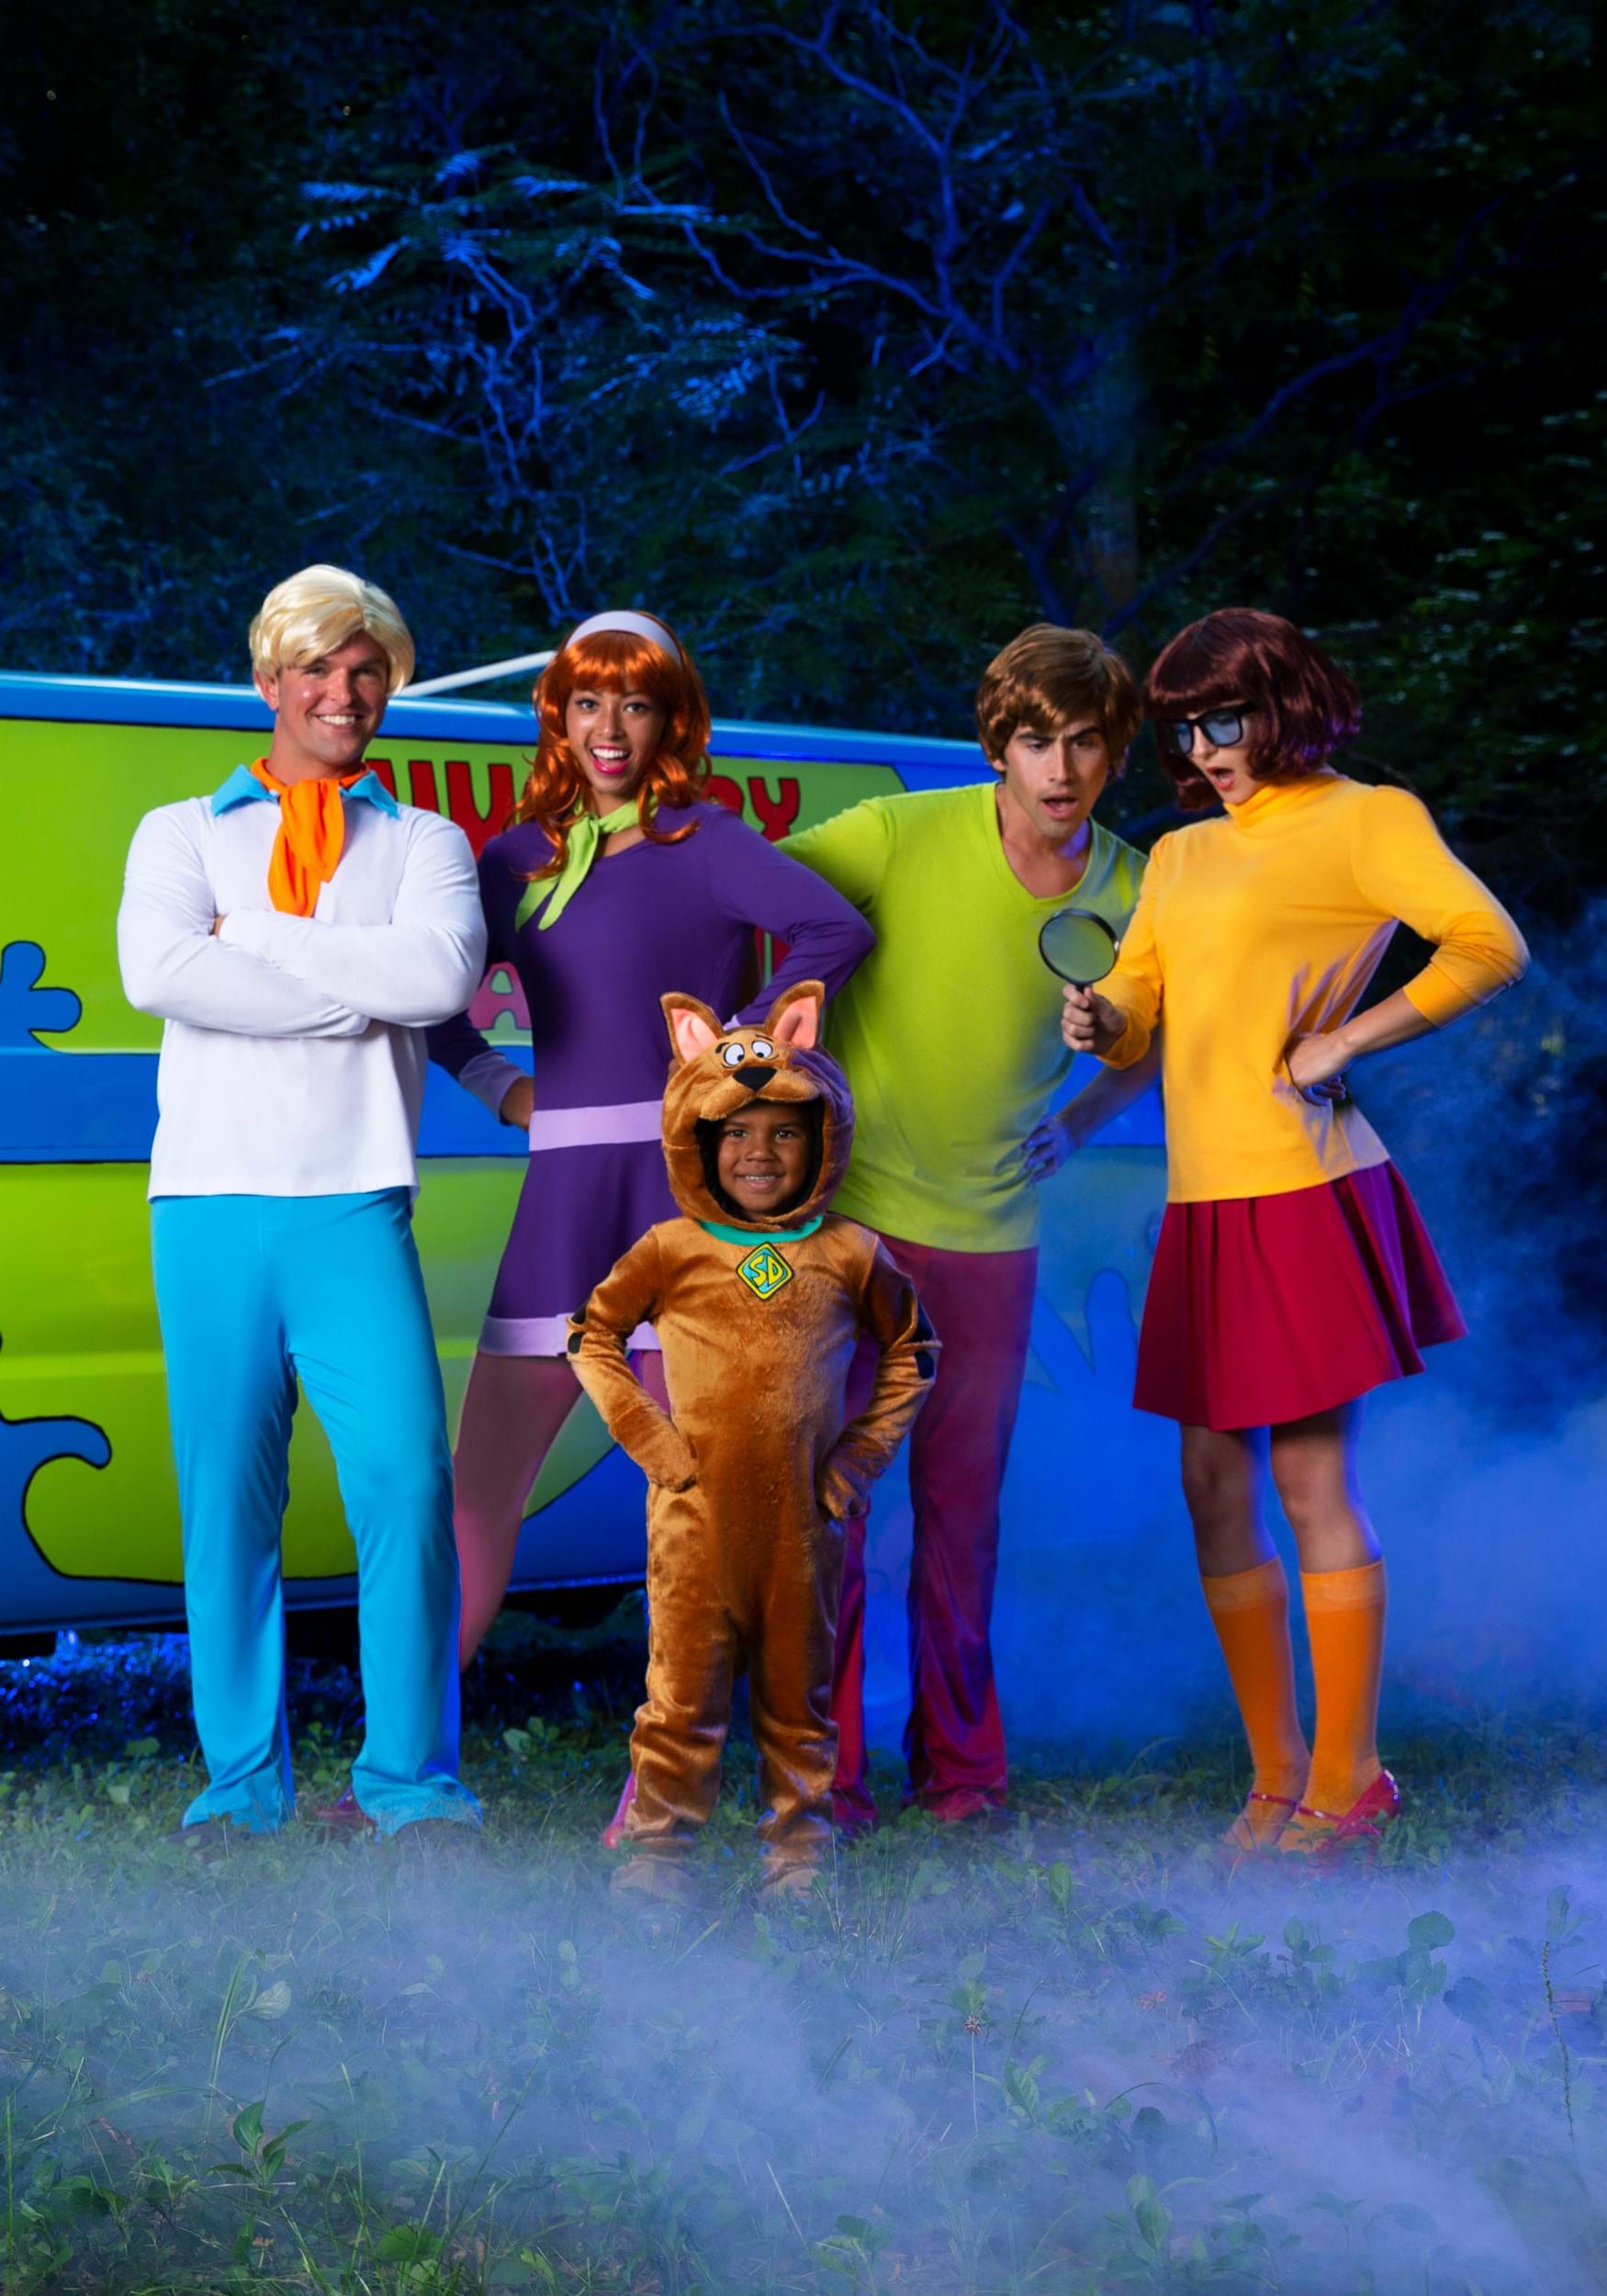 Shaggy velma and scooby costumes